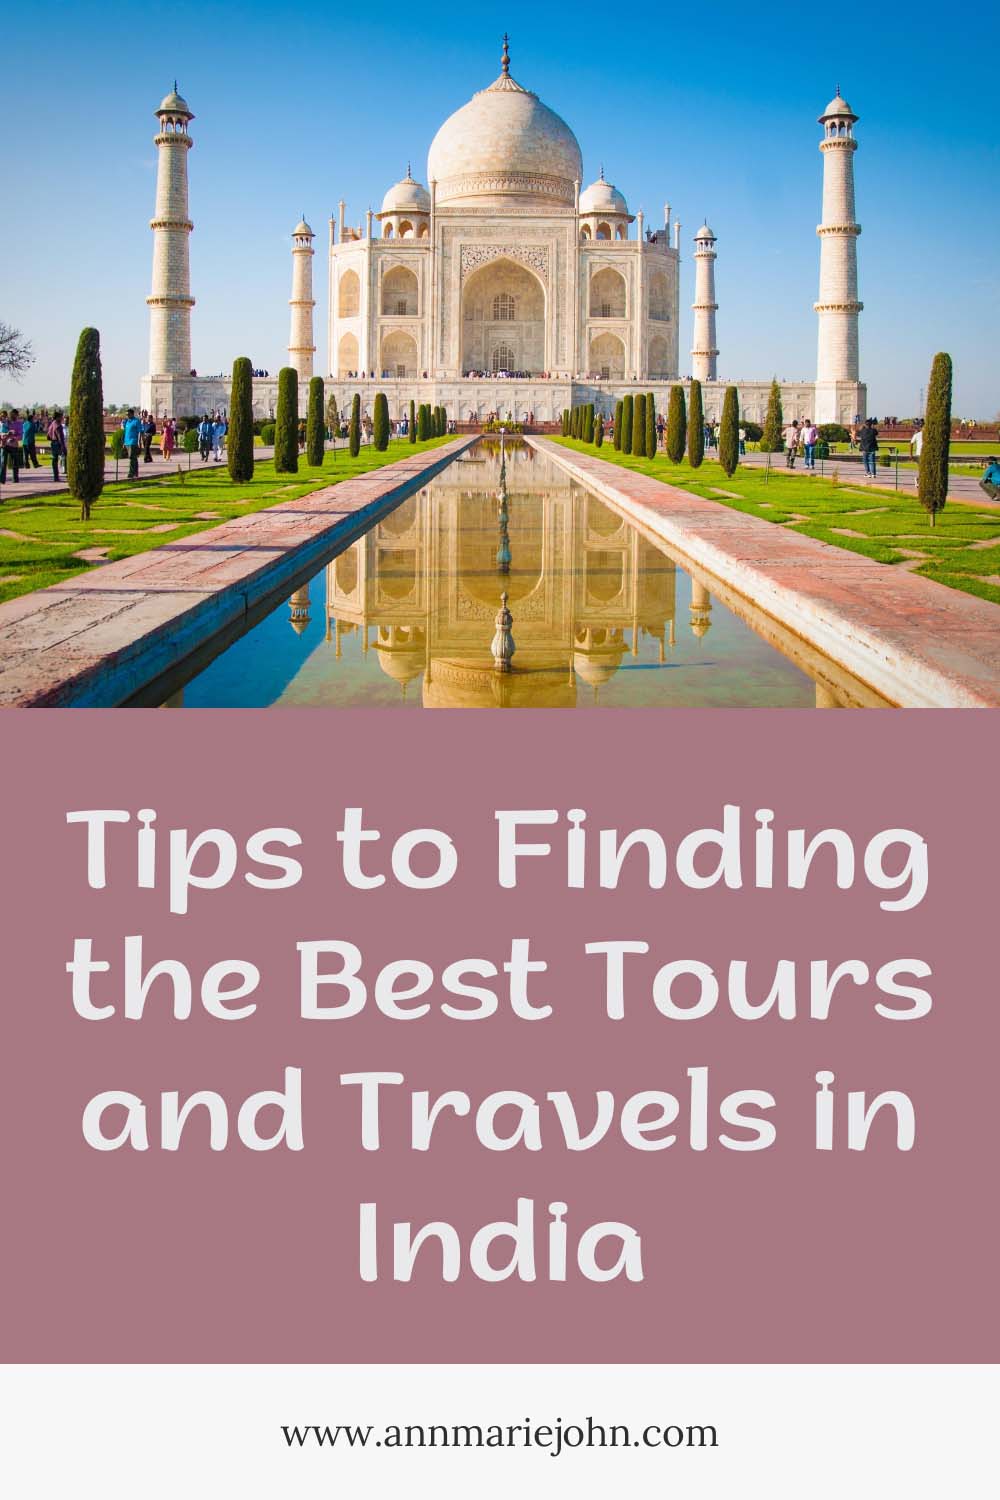 Tips to Finding the Best Tours and Travels in India